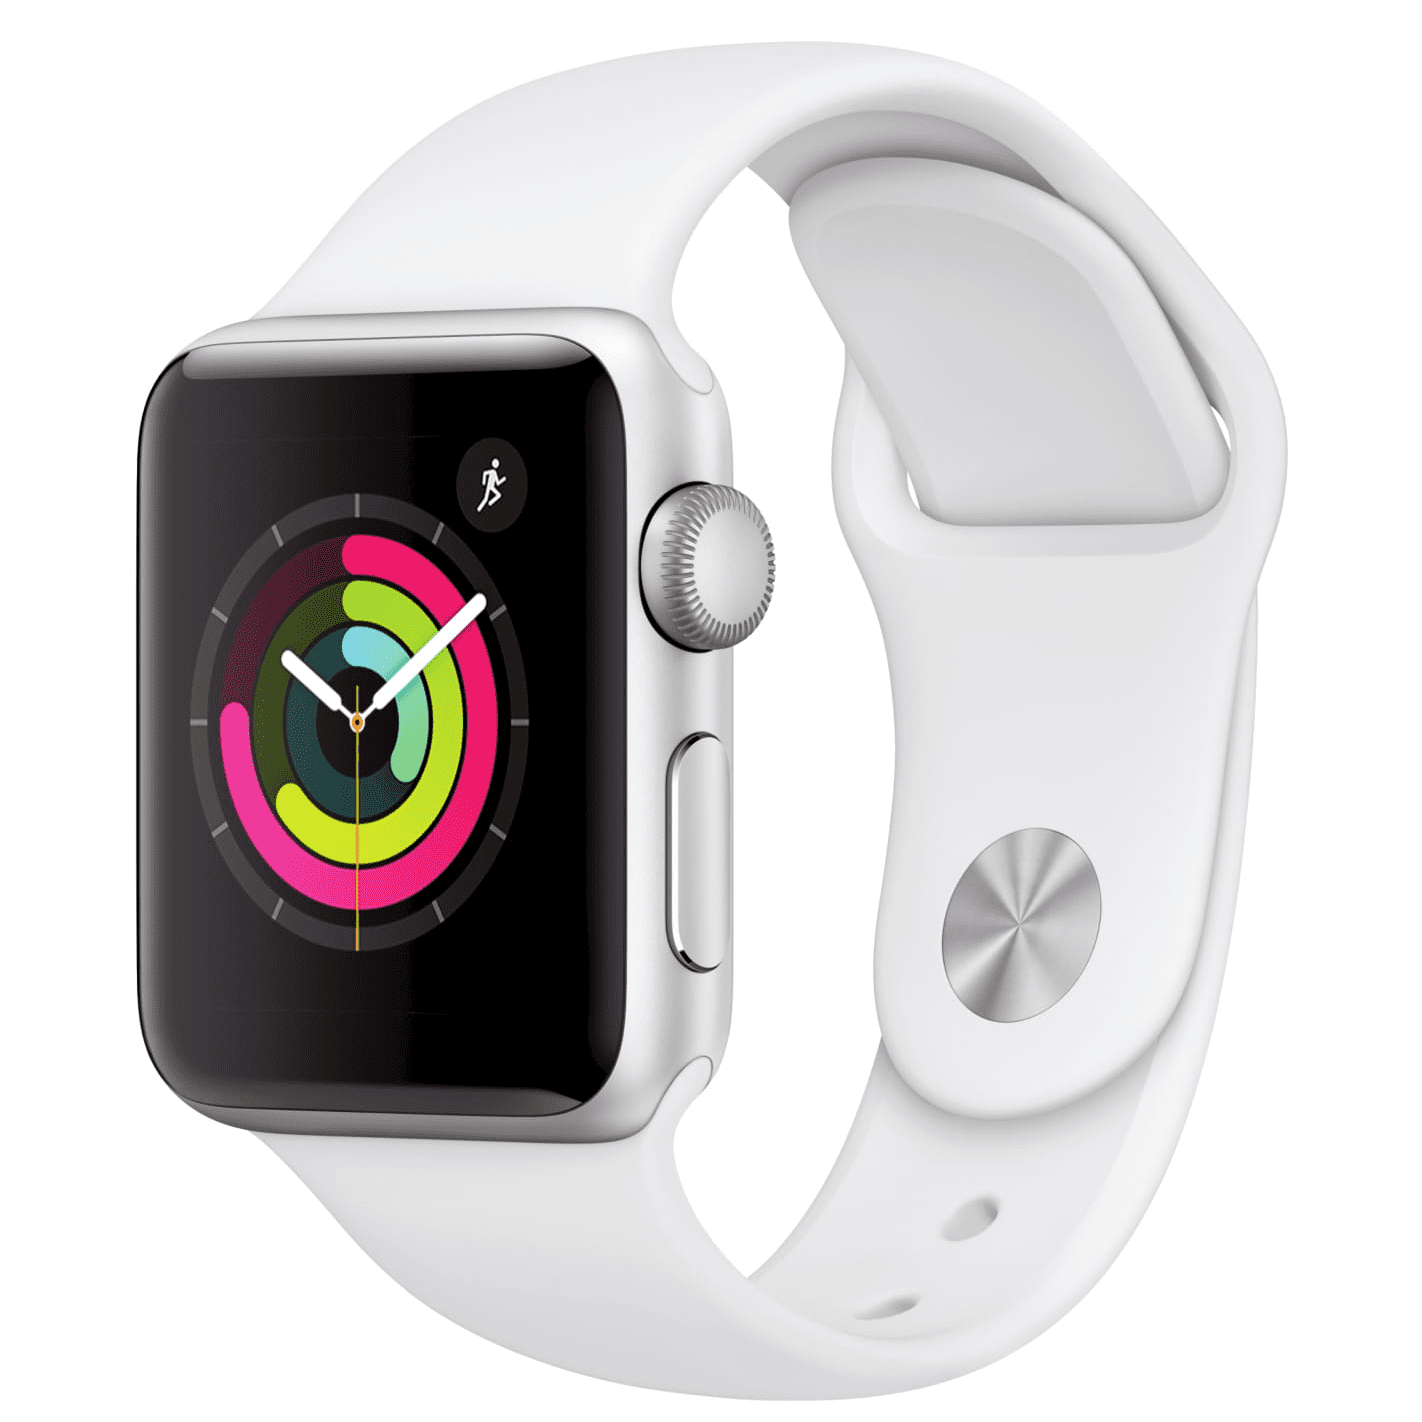 How To Charge Your Apple Watch Series 3 15